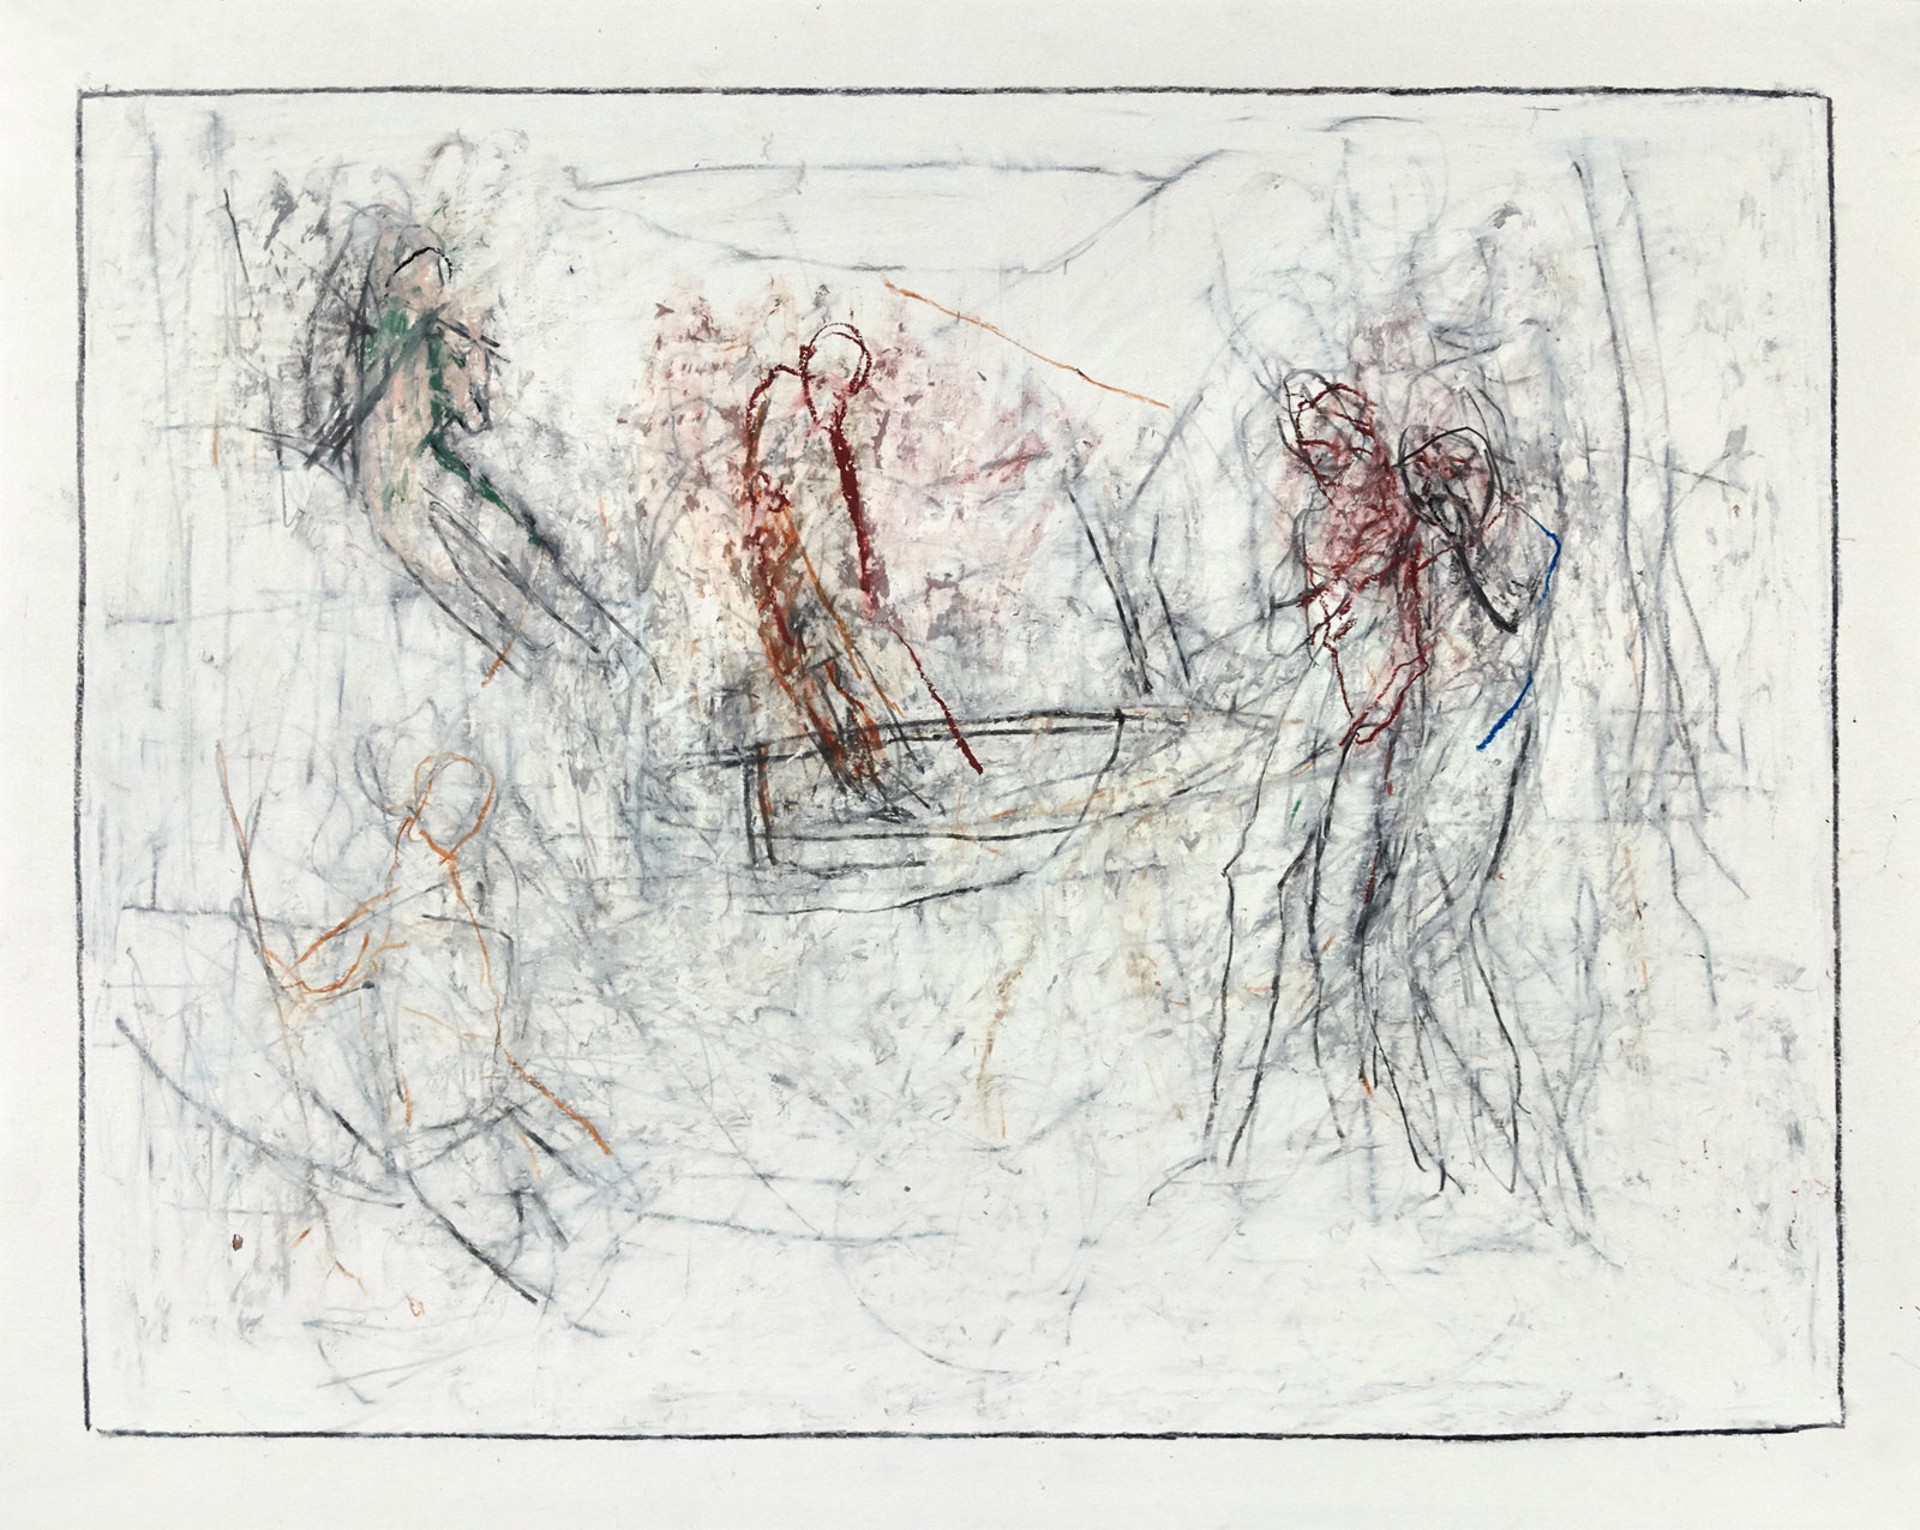 Drawings from Mt Gretna: Adam and Eve Studies by Thaddeus Radell